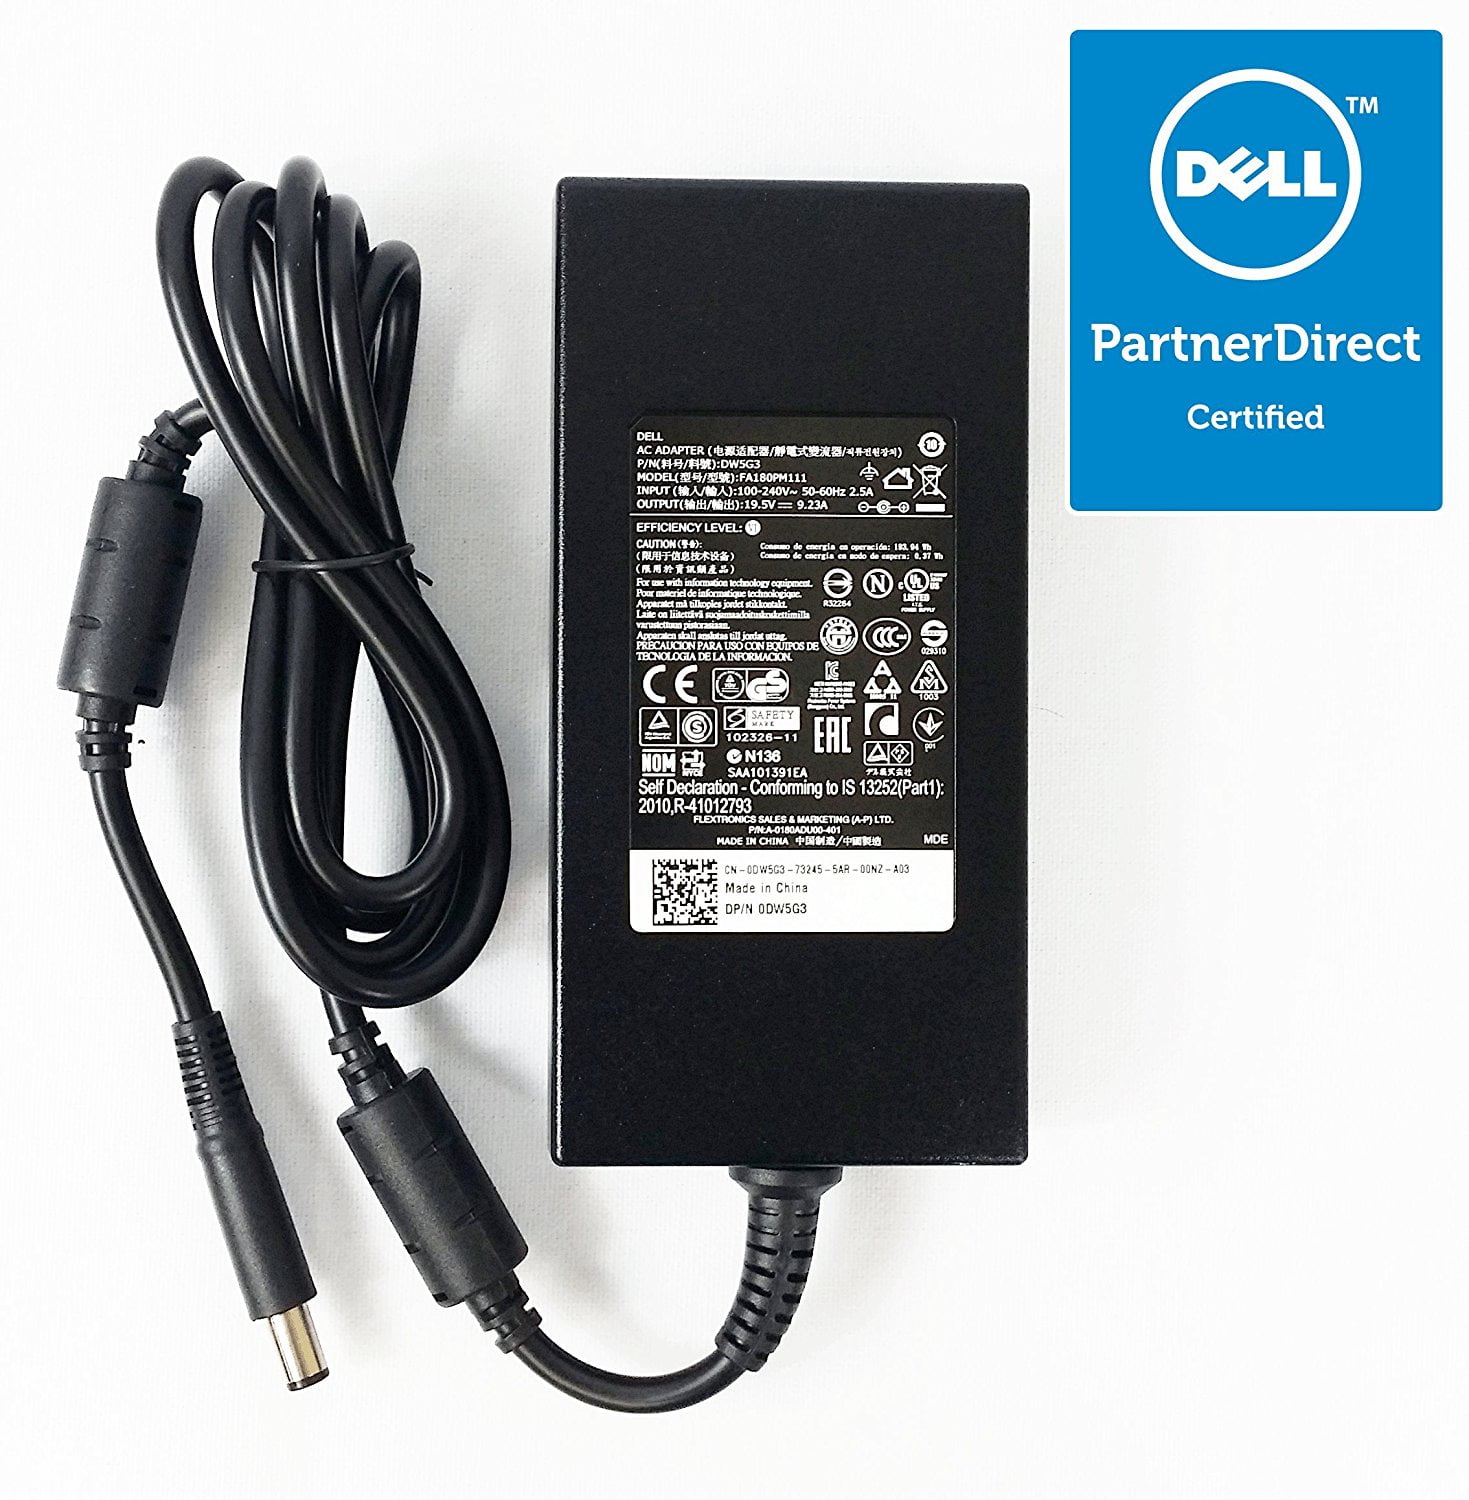 180W AC Power Adapter Charger for Dell INSPIRON 15 7000 7559 7566 7577 Gaming PC